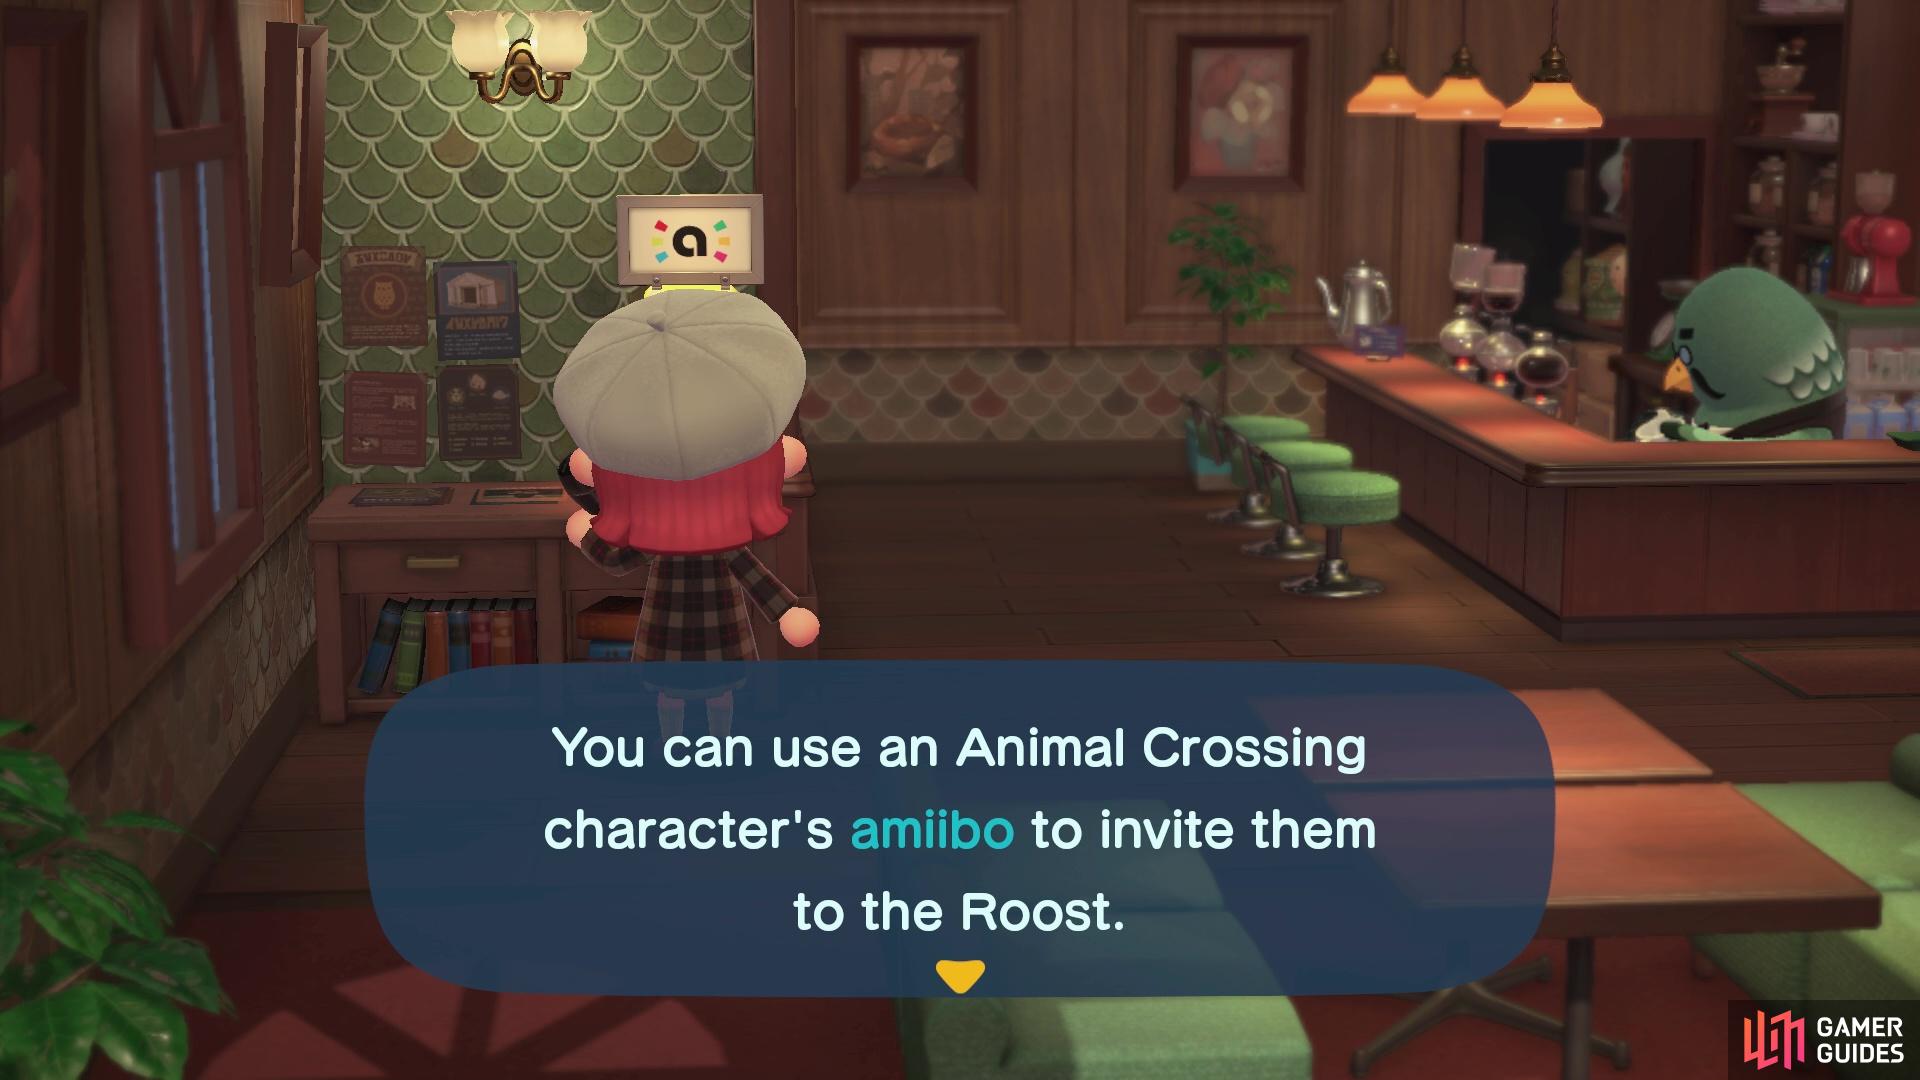 Amiibos can be used to invite Animal Crossing characters to the Roost!